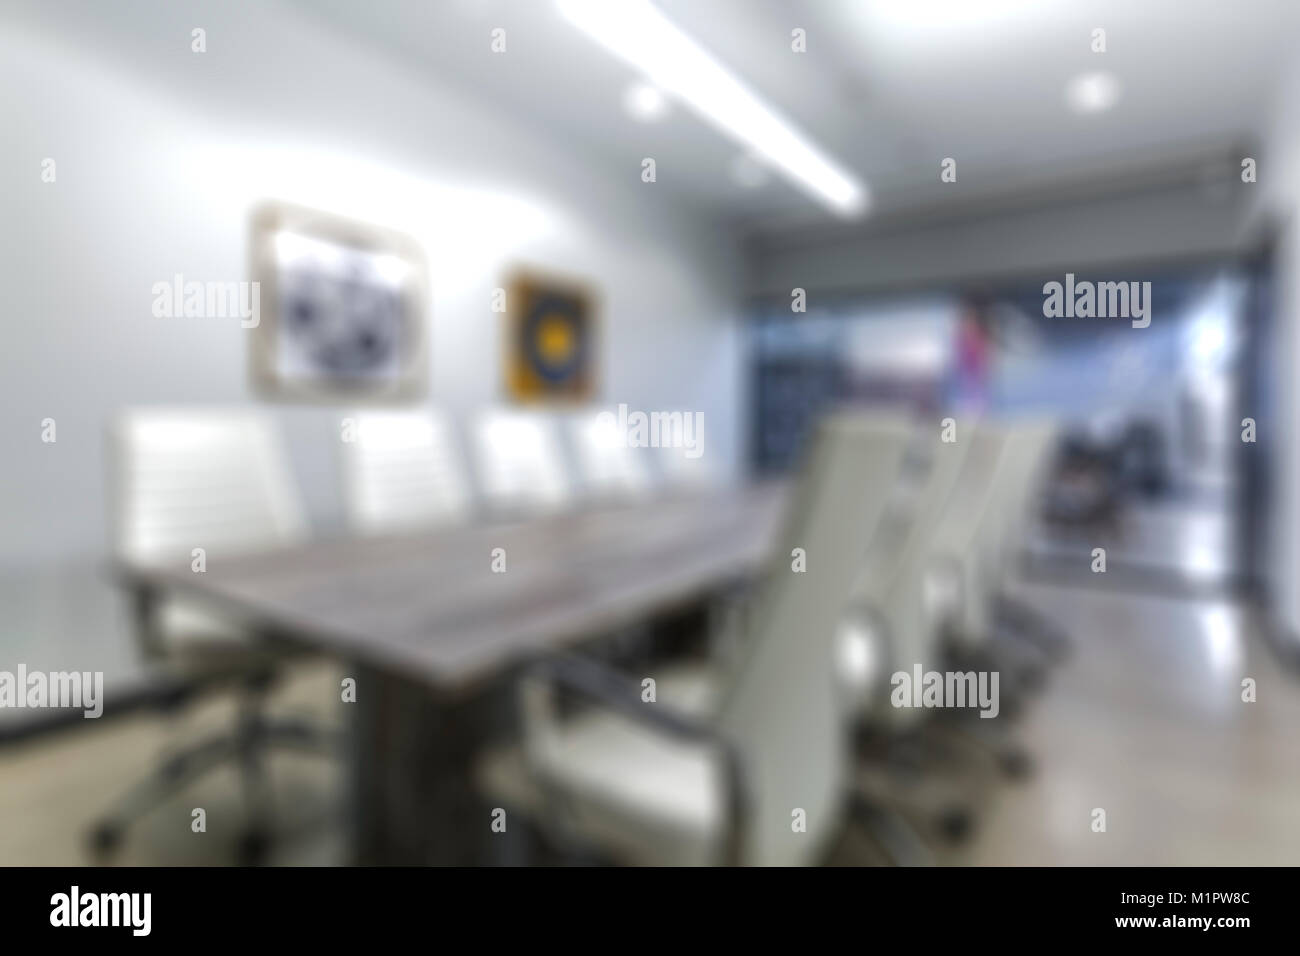 Blurred background of conference room interior Stock Photo